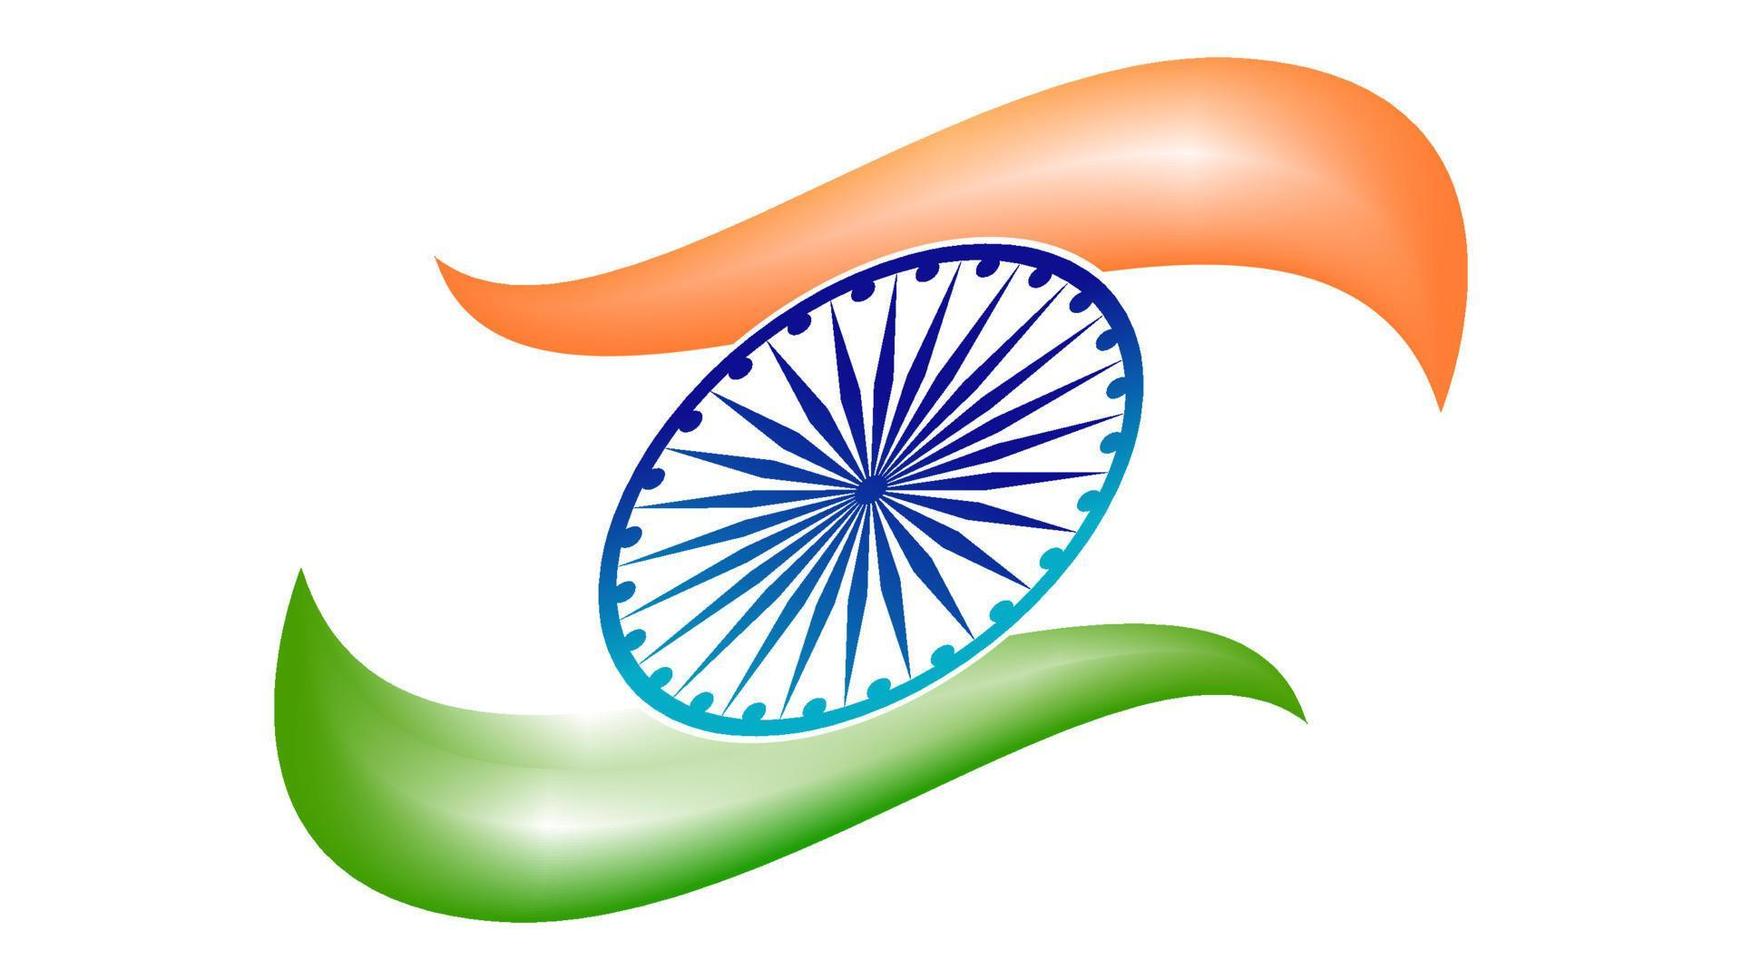 15th august independence day India vector illustration